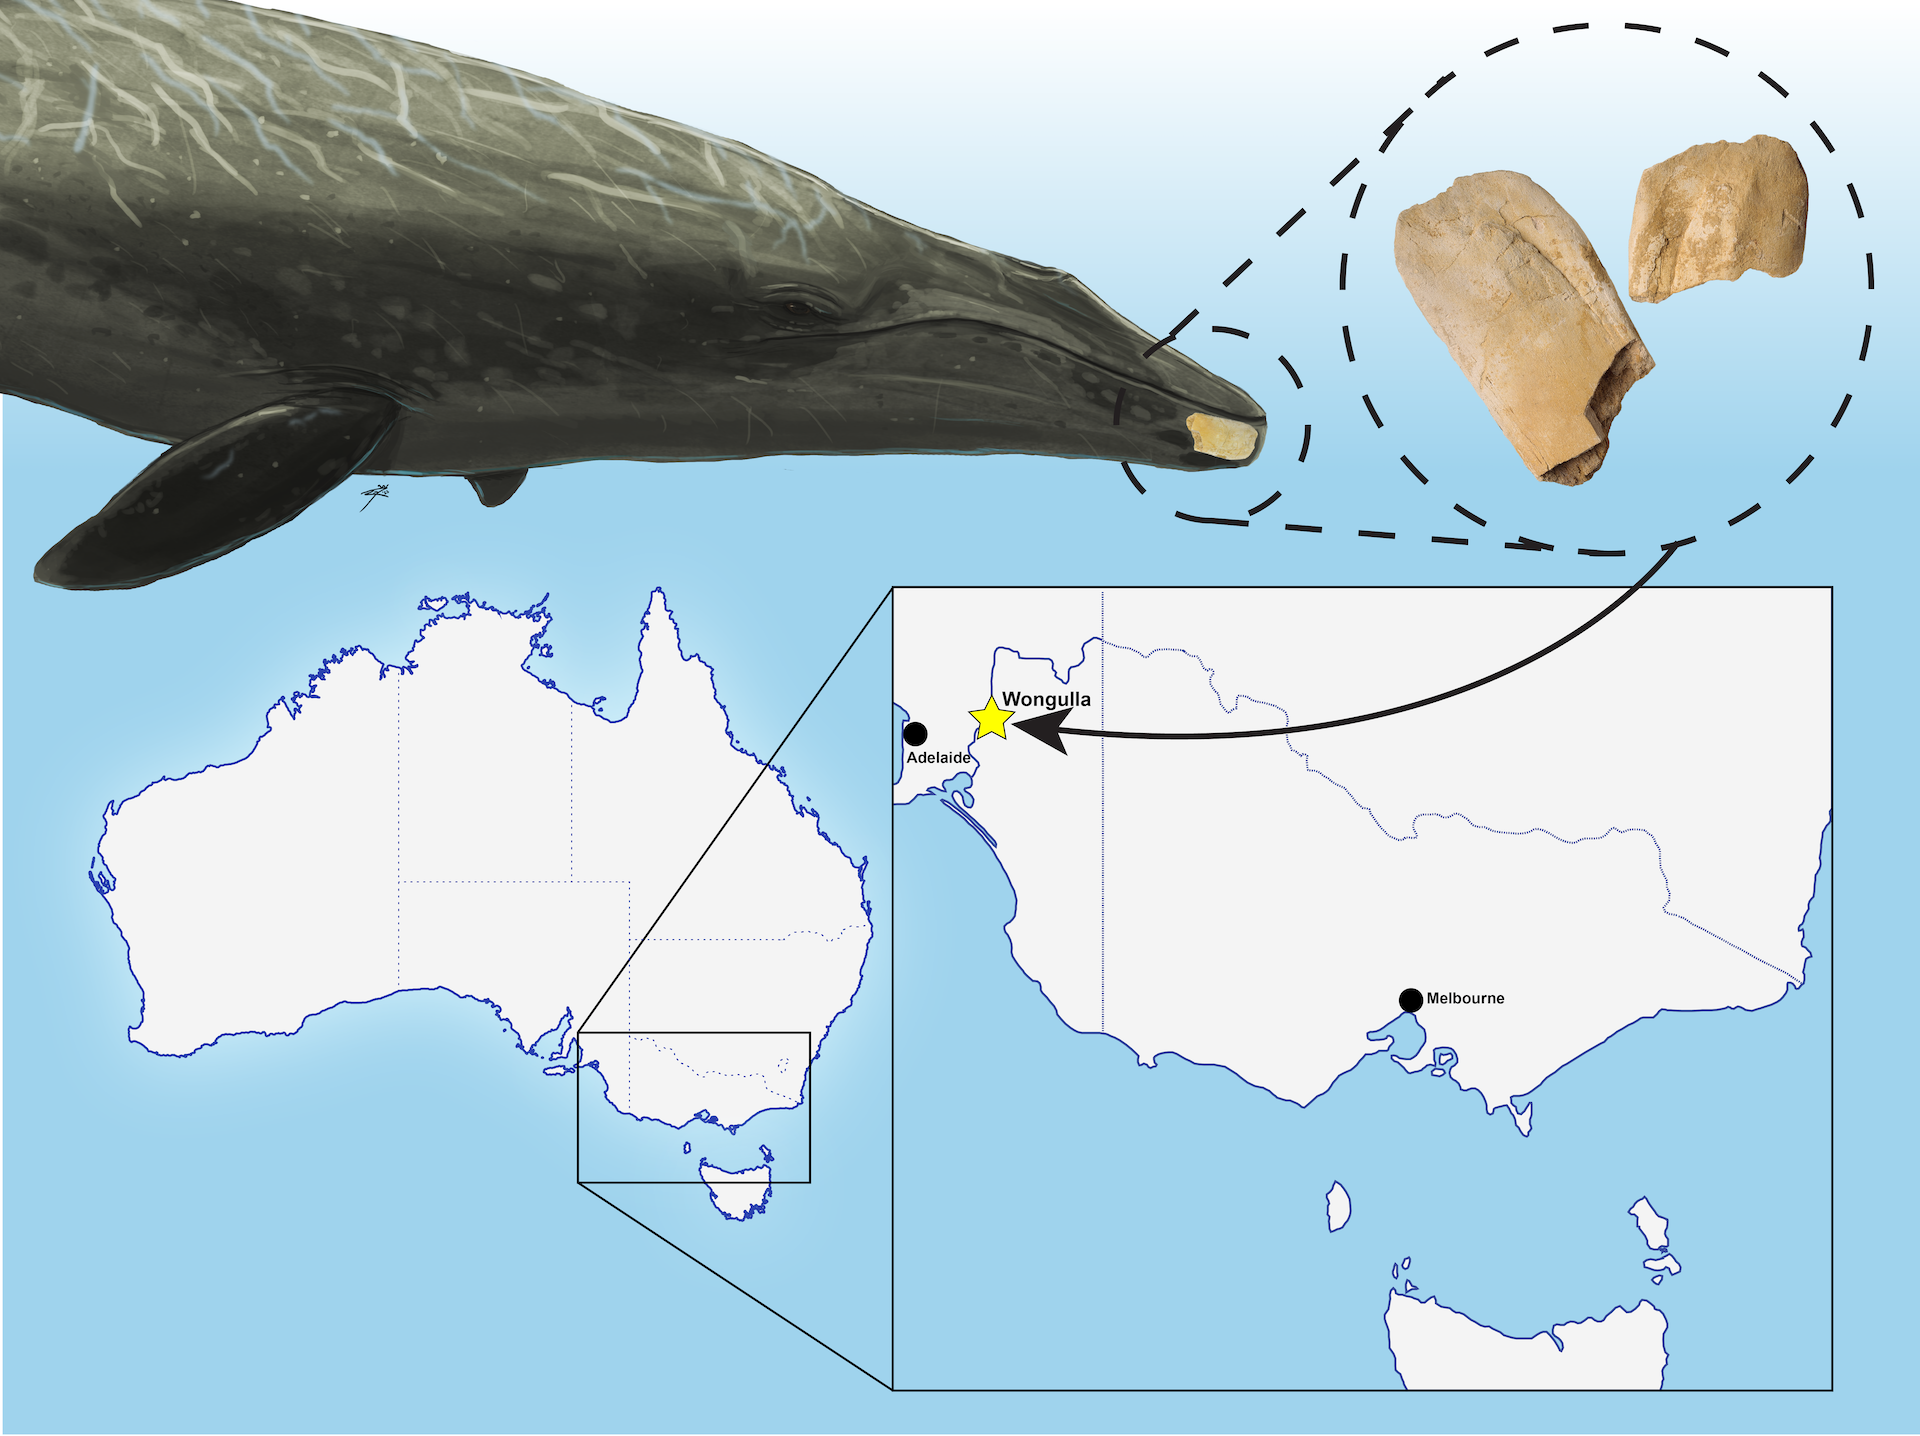 An artist's reconstruction of the extinct whale, showing where the fossil is located, and a map of Australia showing the location it was found